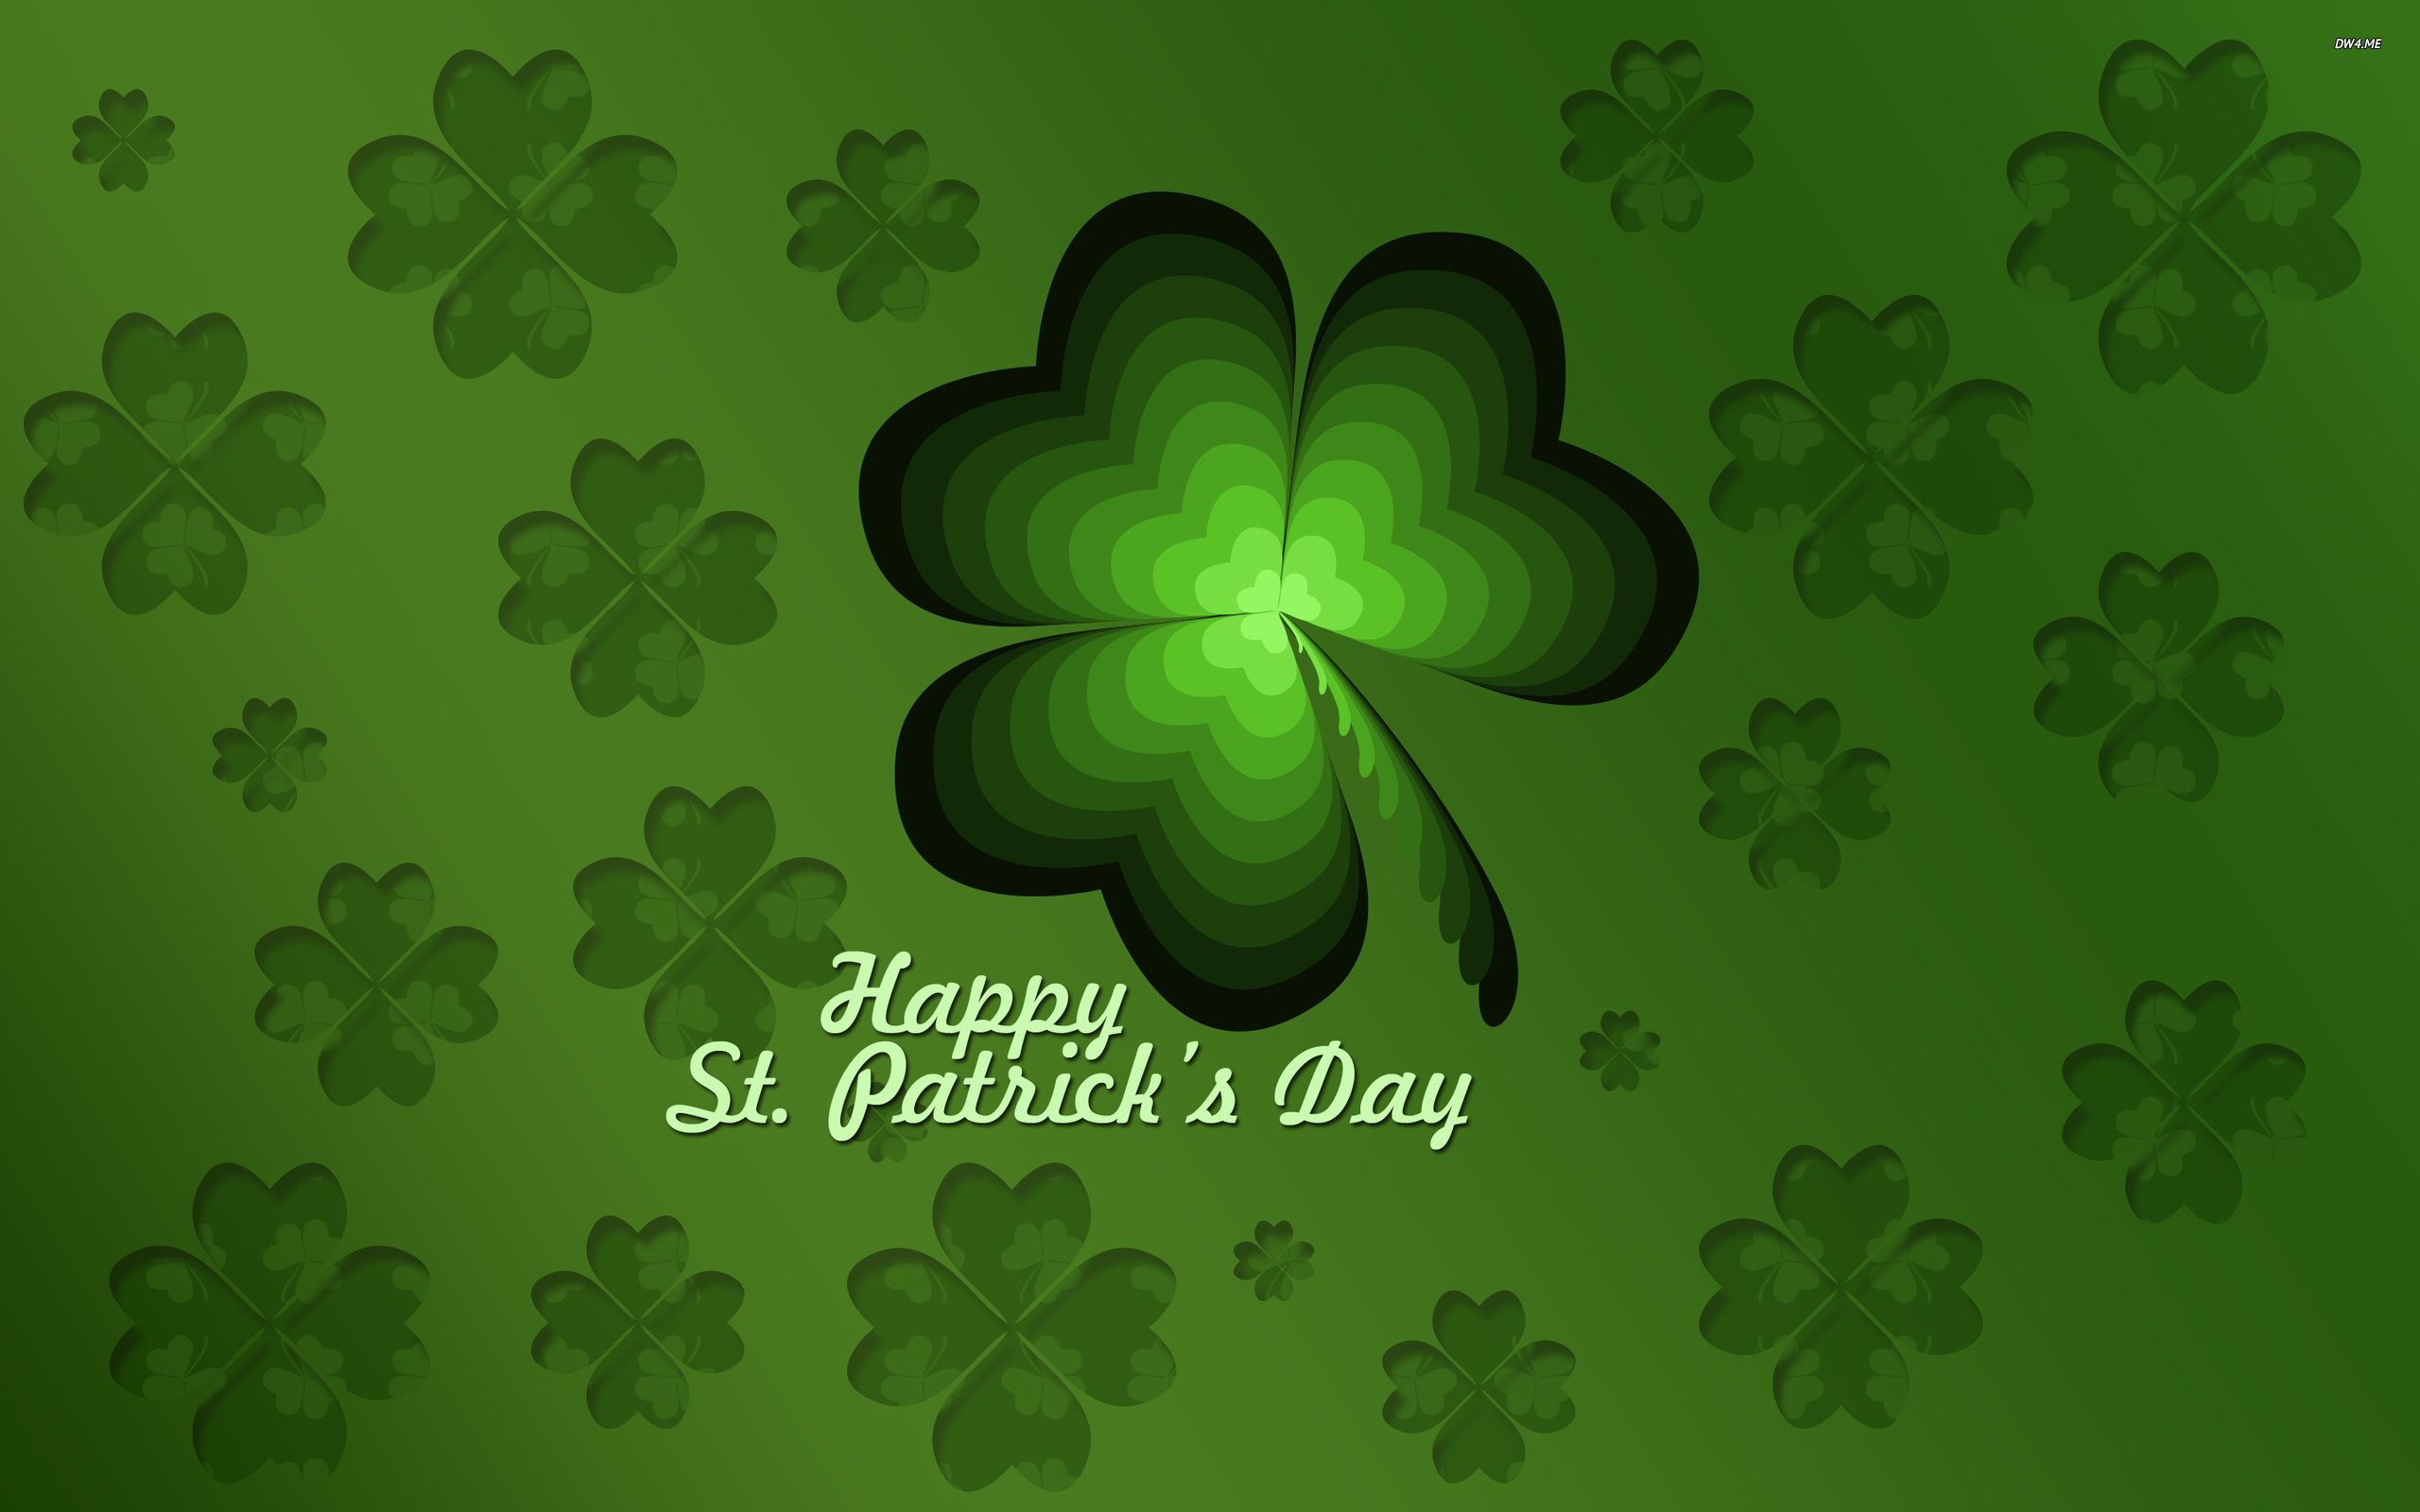 St. Patrick's Day wallpaper - Holiday wallpapers - #2622